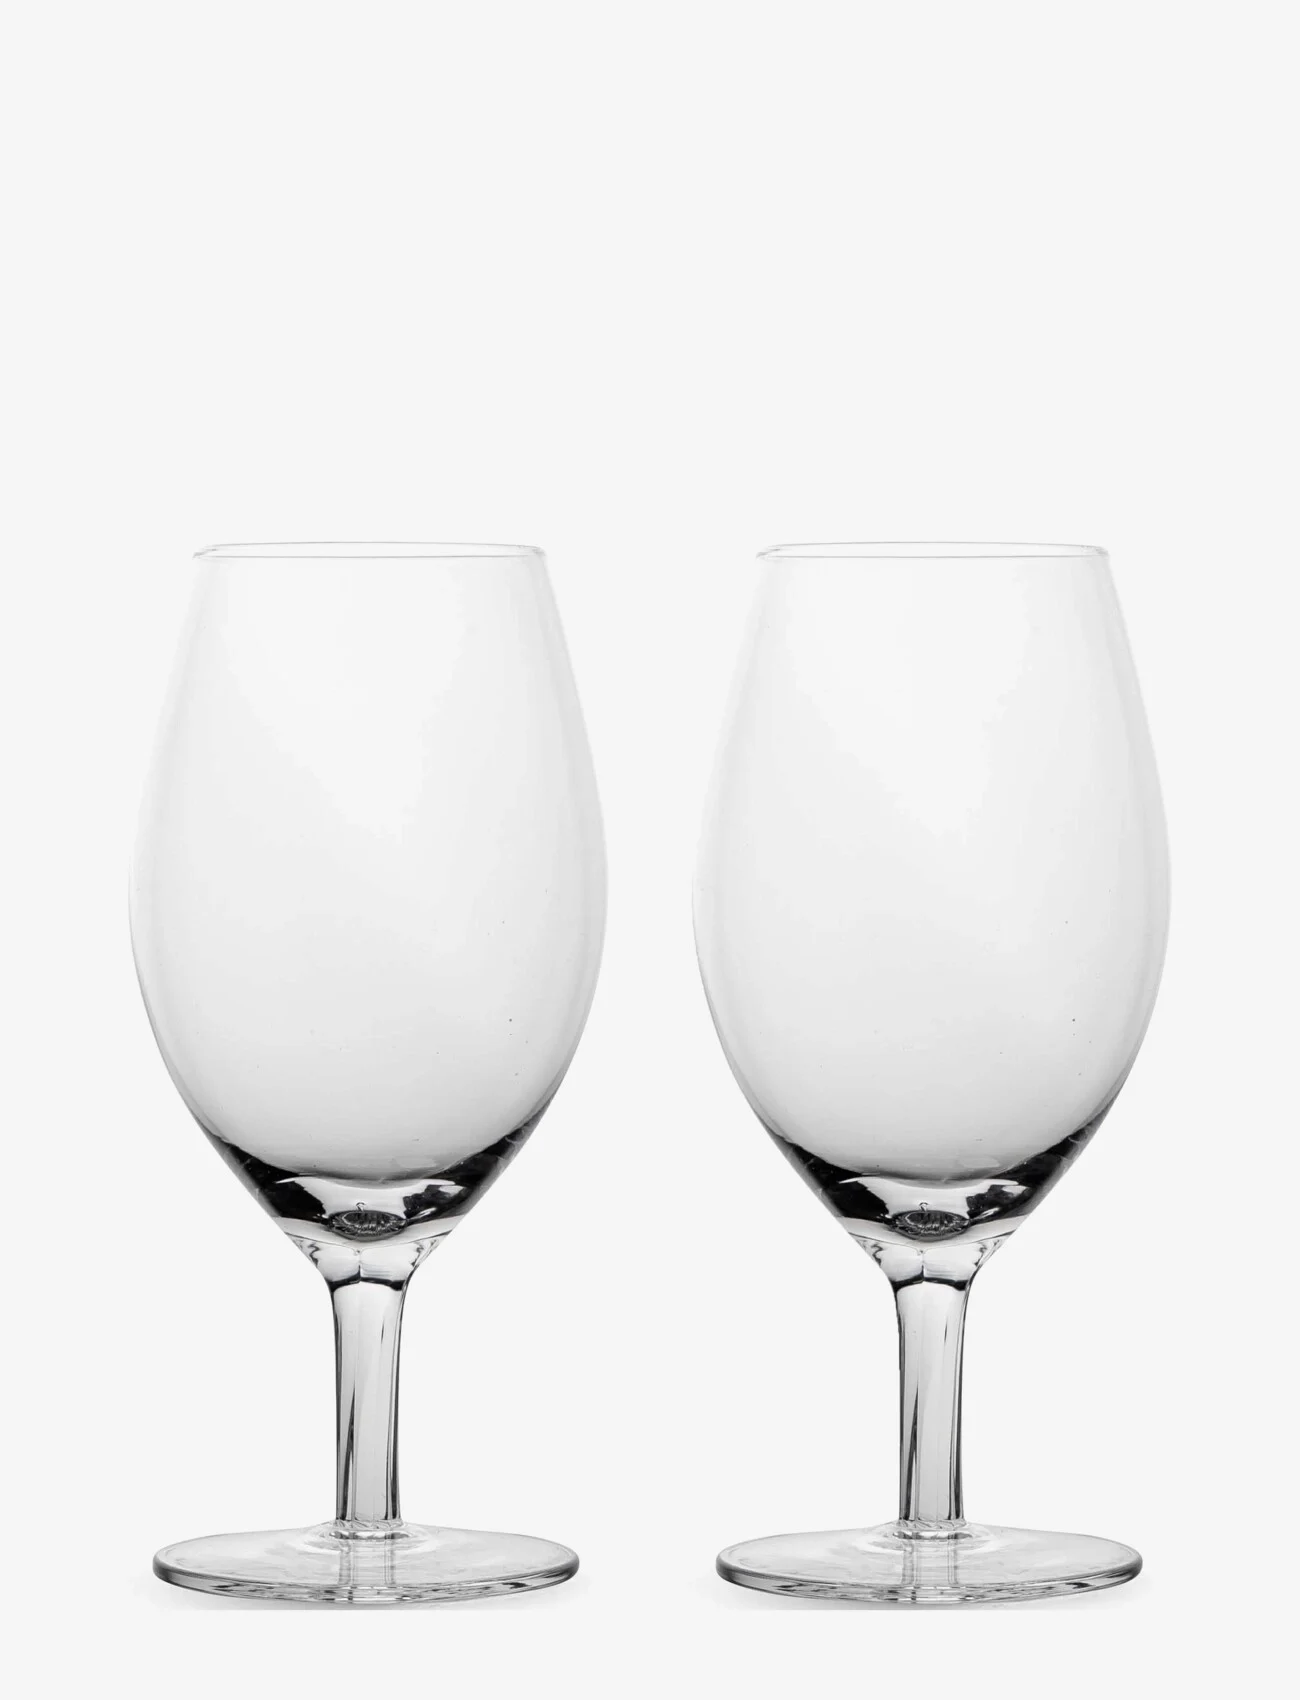 Sagaform - Saga drinking glass, 2-pack - lowest prices - clear - 0